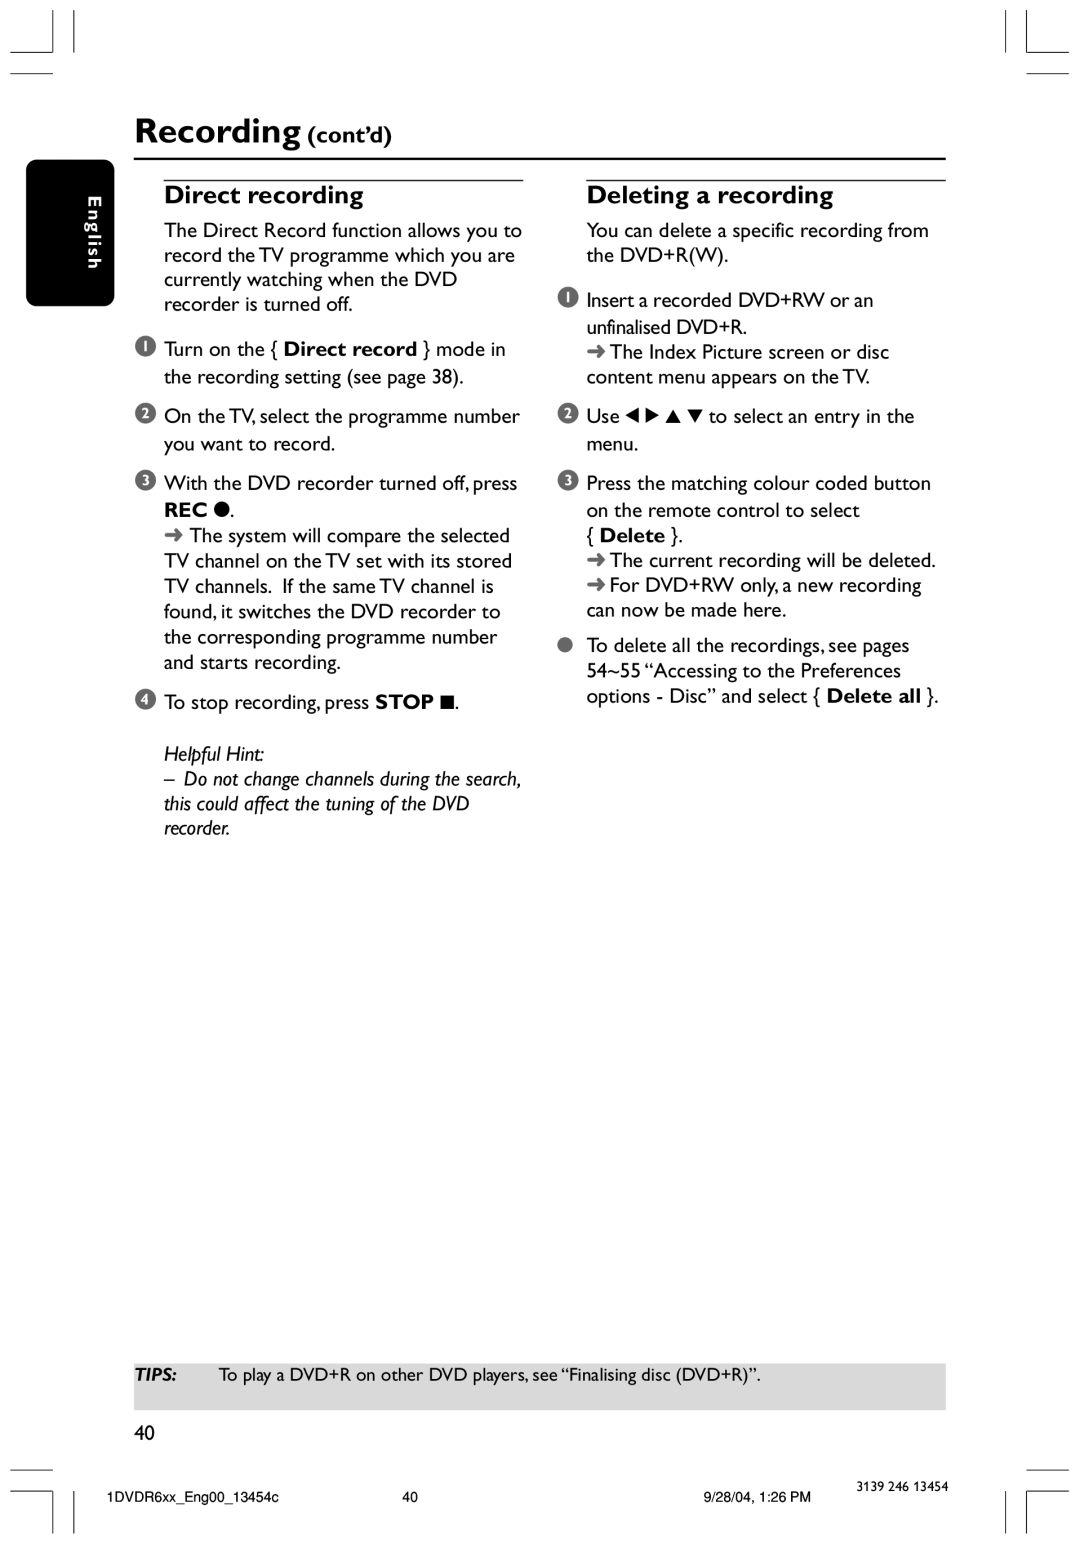 Philips DVDR612/97 user manual Recording cont’d, Direct recording, Deleting a recording, Helpful Hint, Delete 